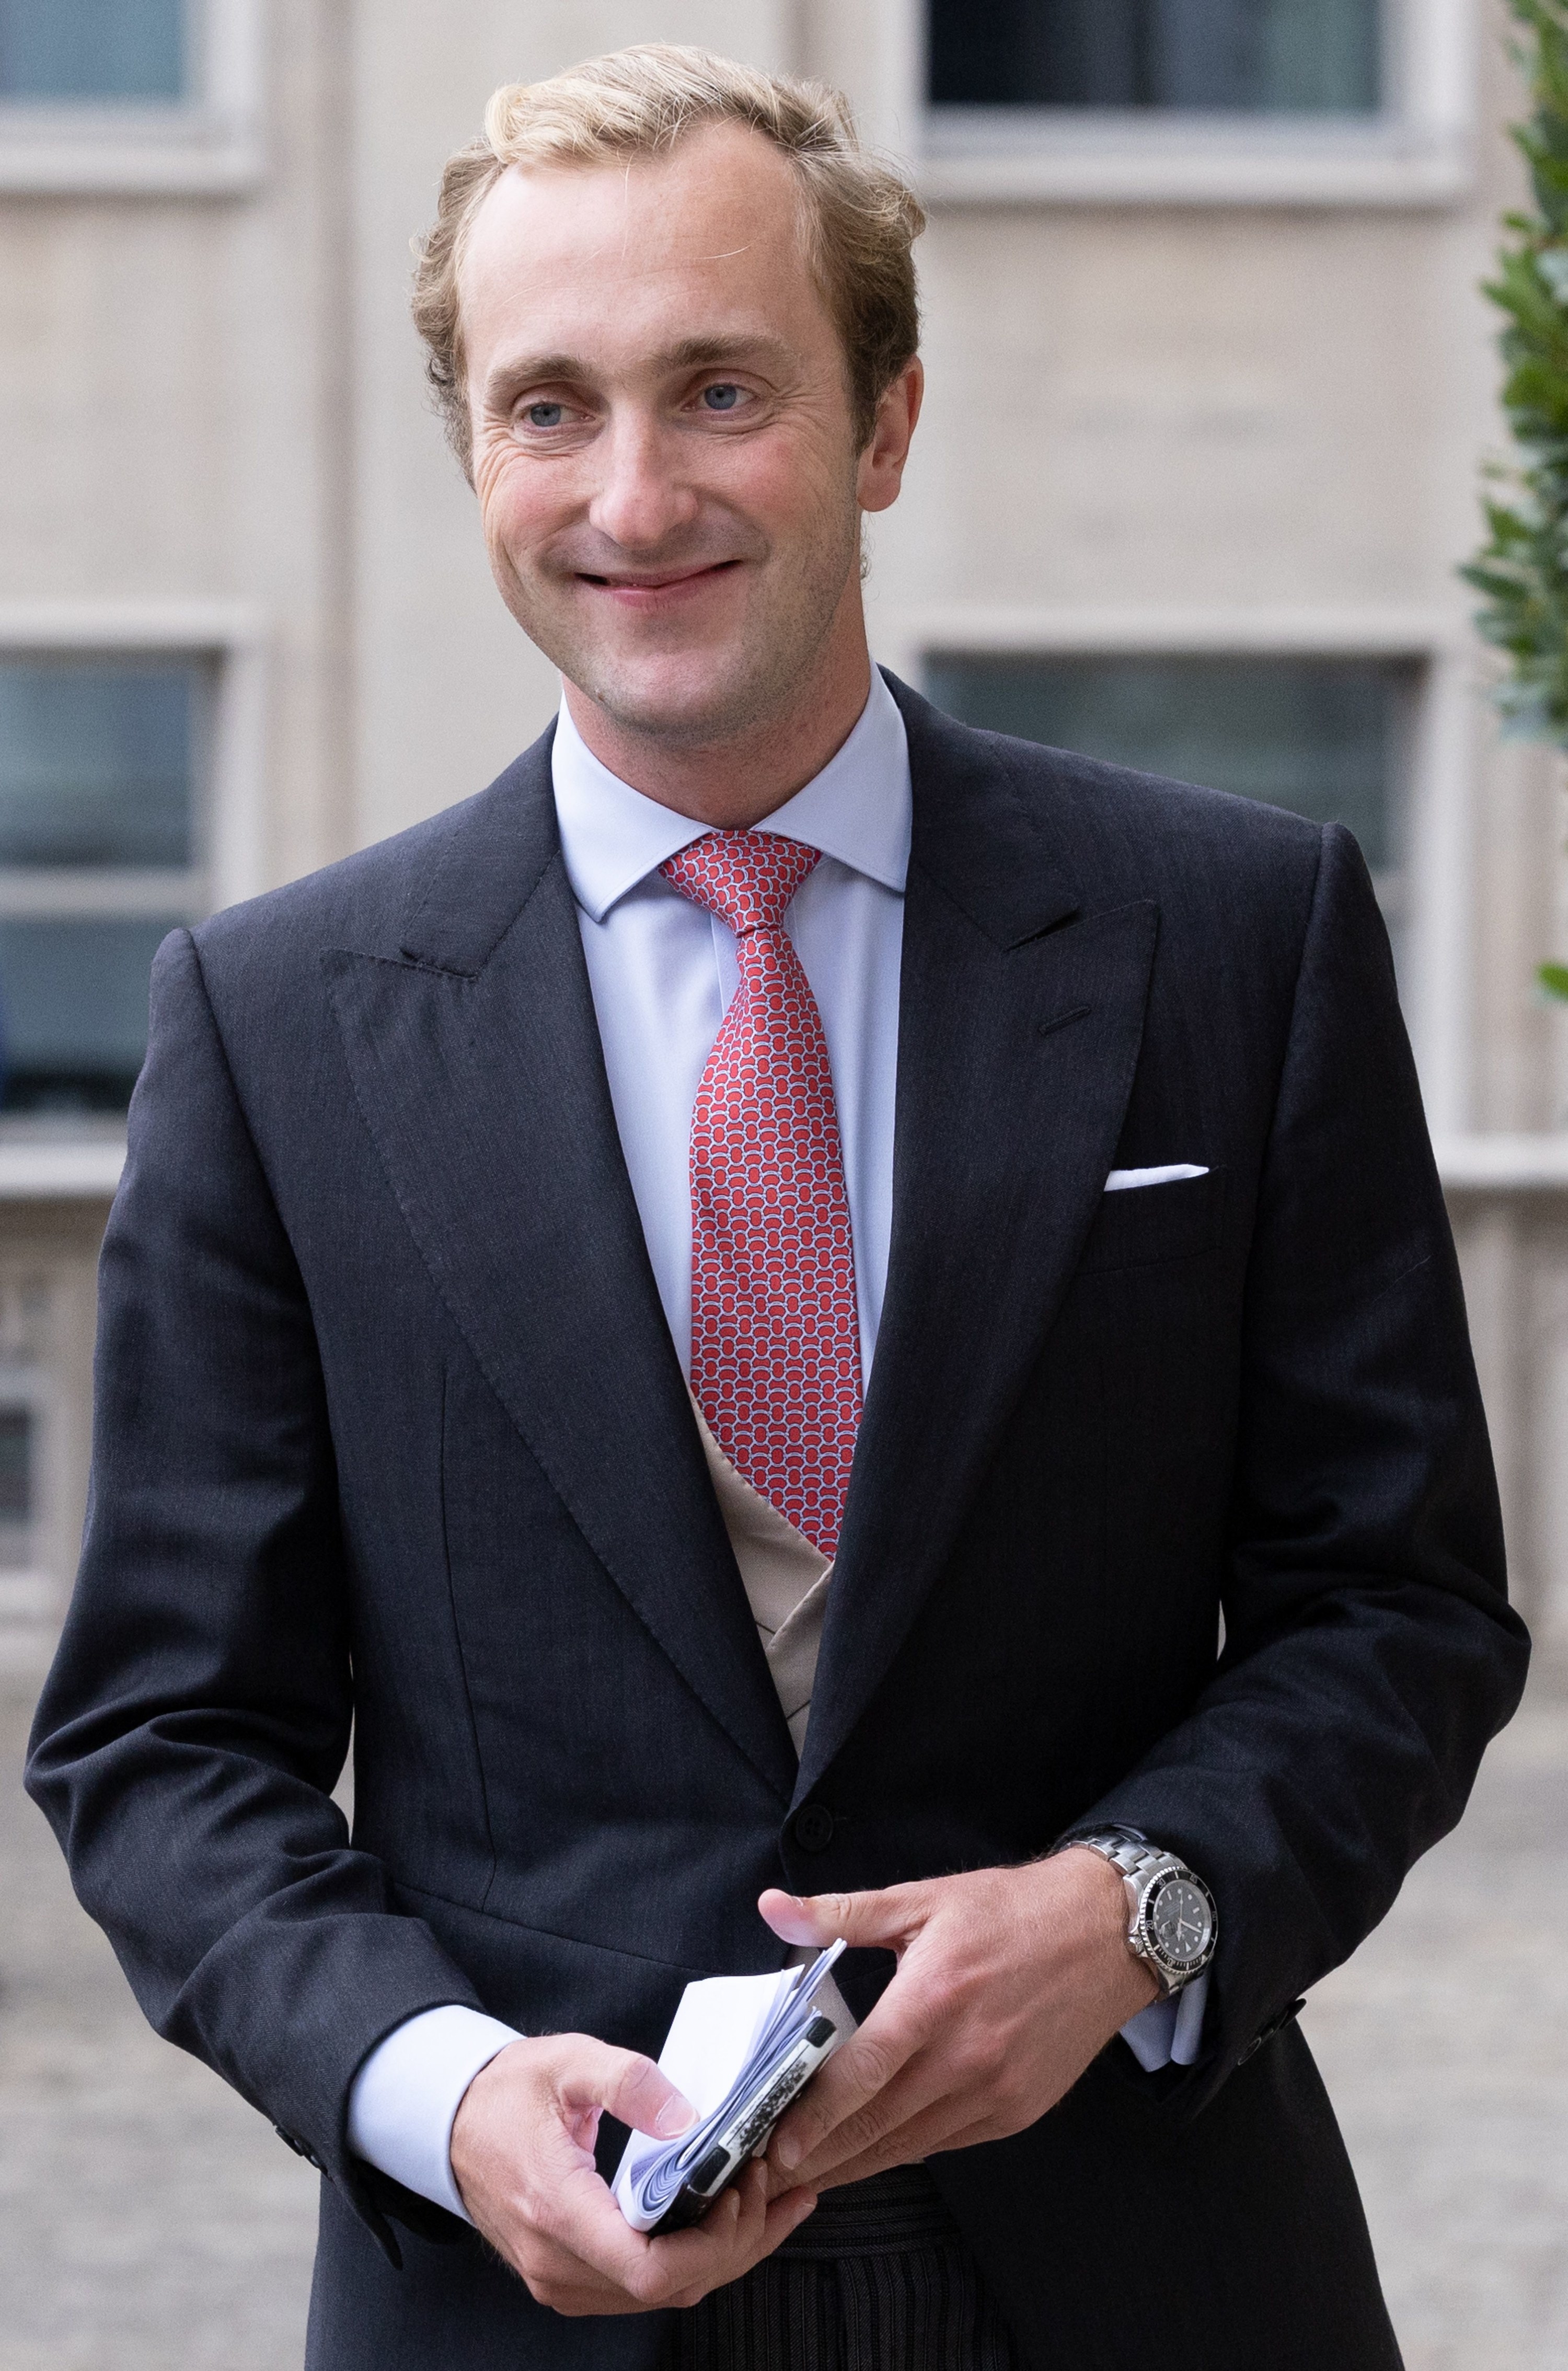 Prince Joachim pictured ahead of the wedding ceremony of Princess Maria-Laura of Belgium and William Isvy